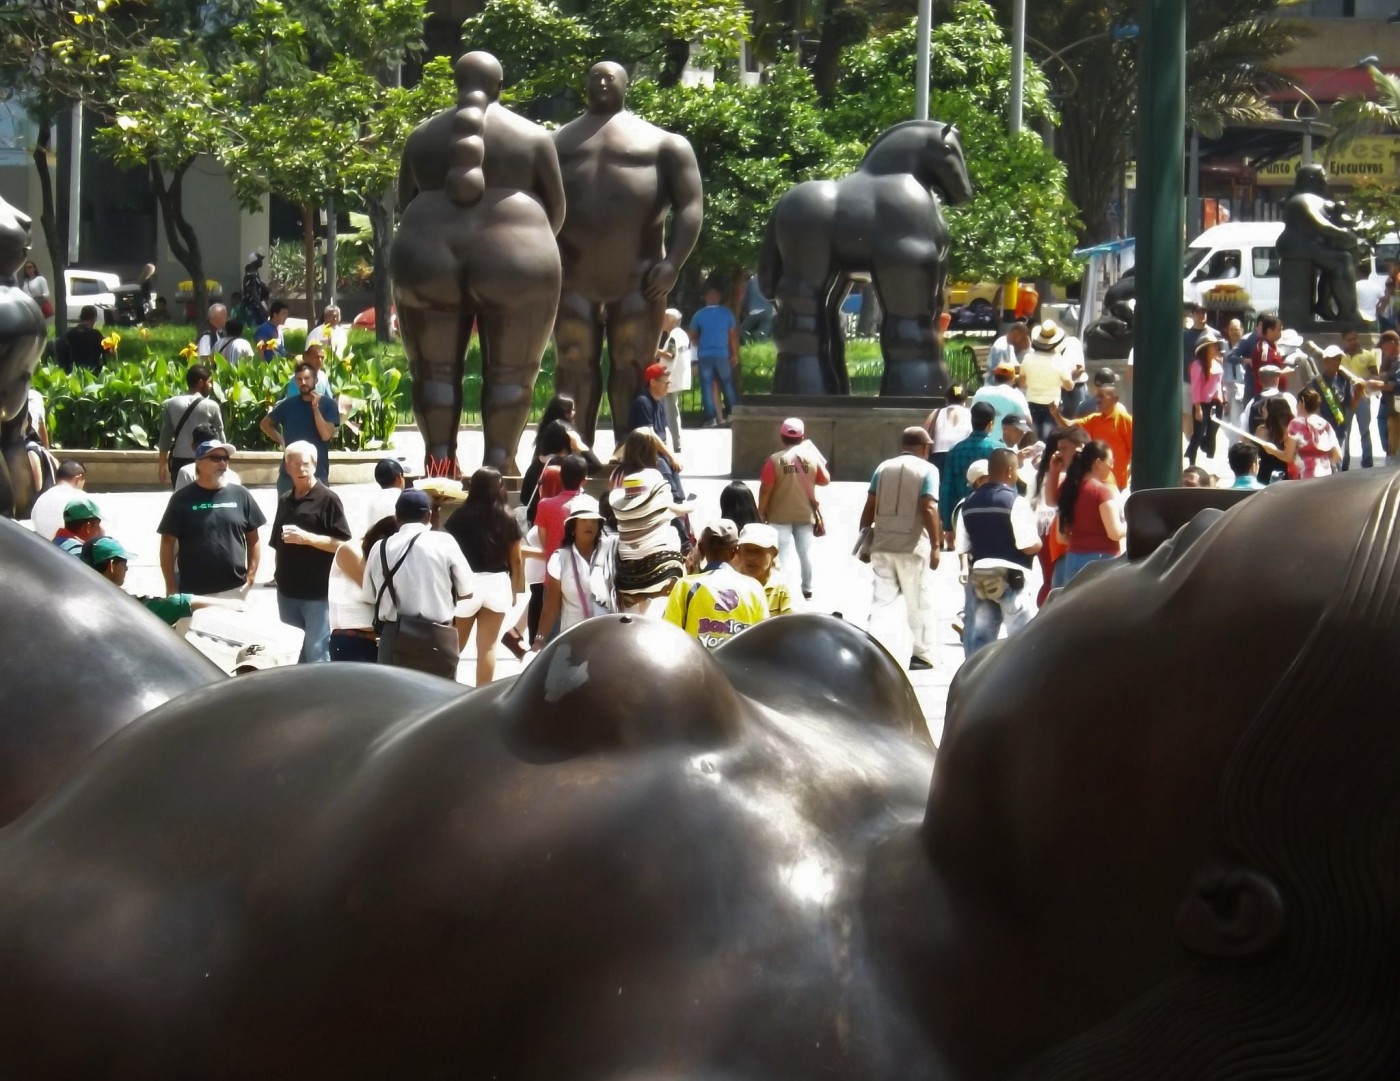 Plaza Botero, Medellin, Colombia © Young Shananhan / Flickr